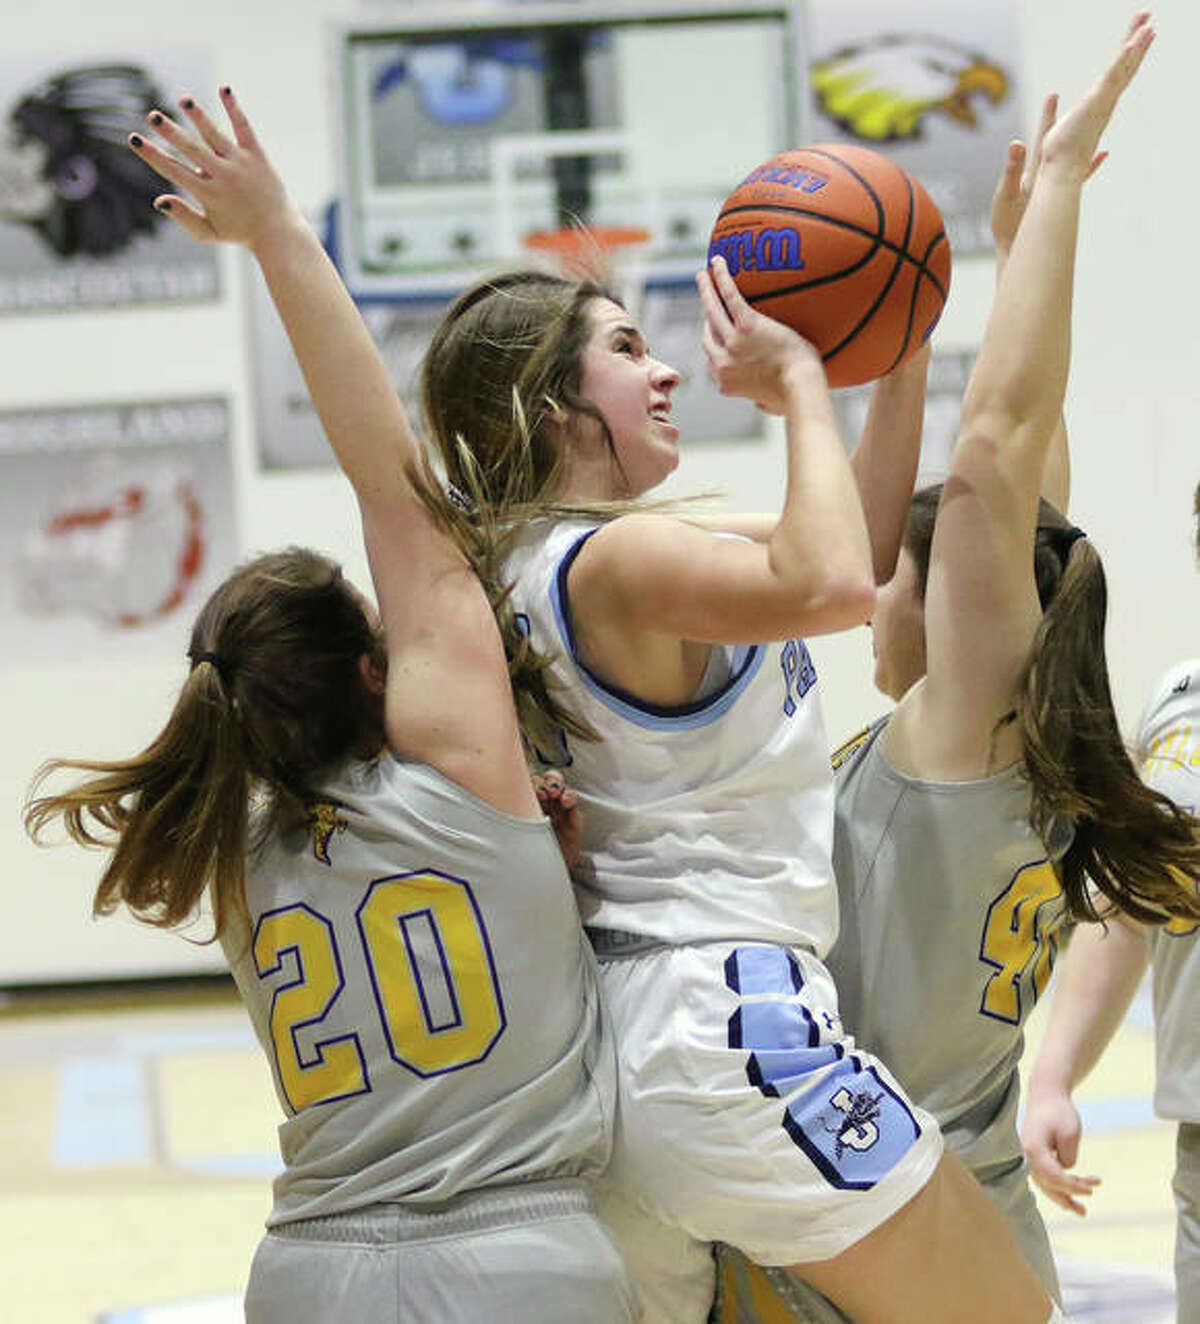 Jersey’s Abby Manns manages to score in tight quarters between Taylorvill’es Kristina Allen and Meghan Donnan during a Panthers’ win Friday in the Deck the Halls with Basketballs Tourney at Havens Gym in Jerseyville. The Panthers will play Marquette for the tourney title on Monday night.